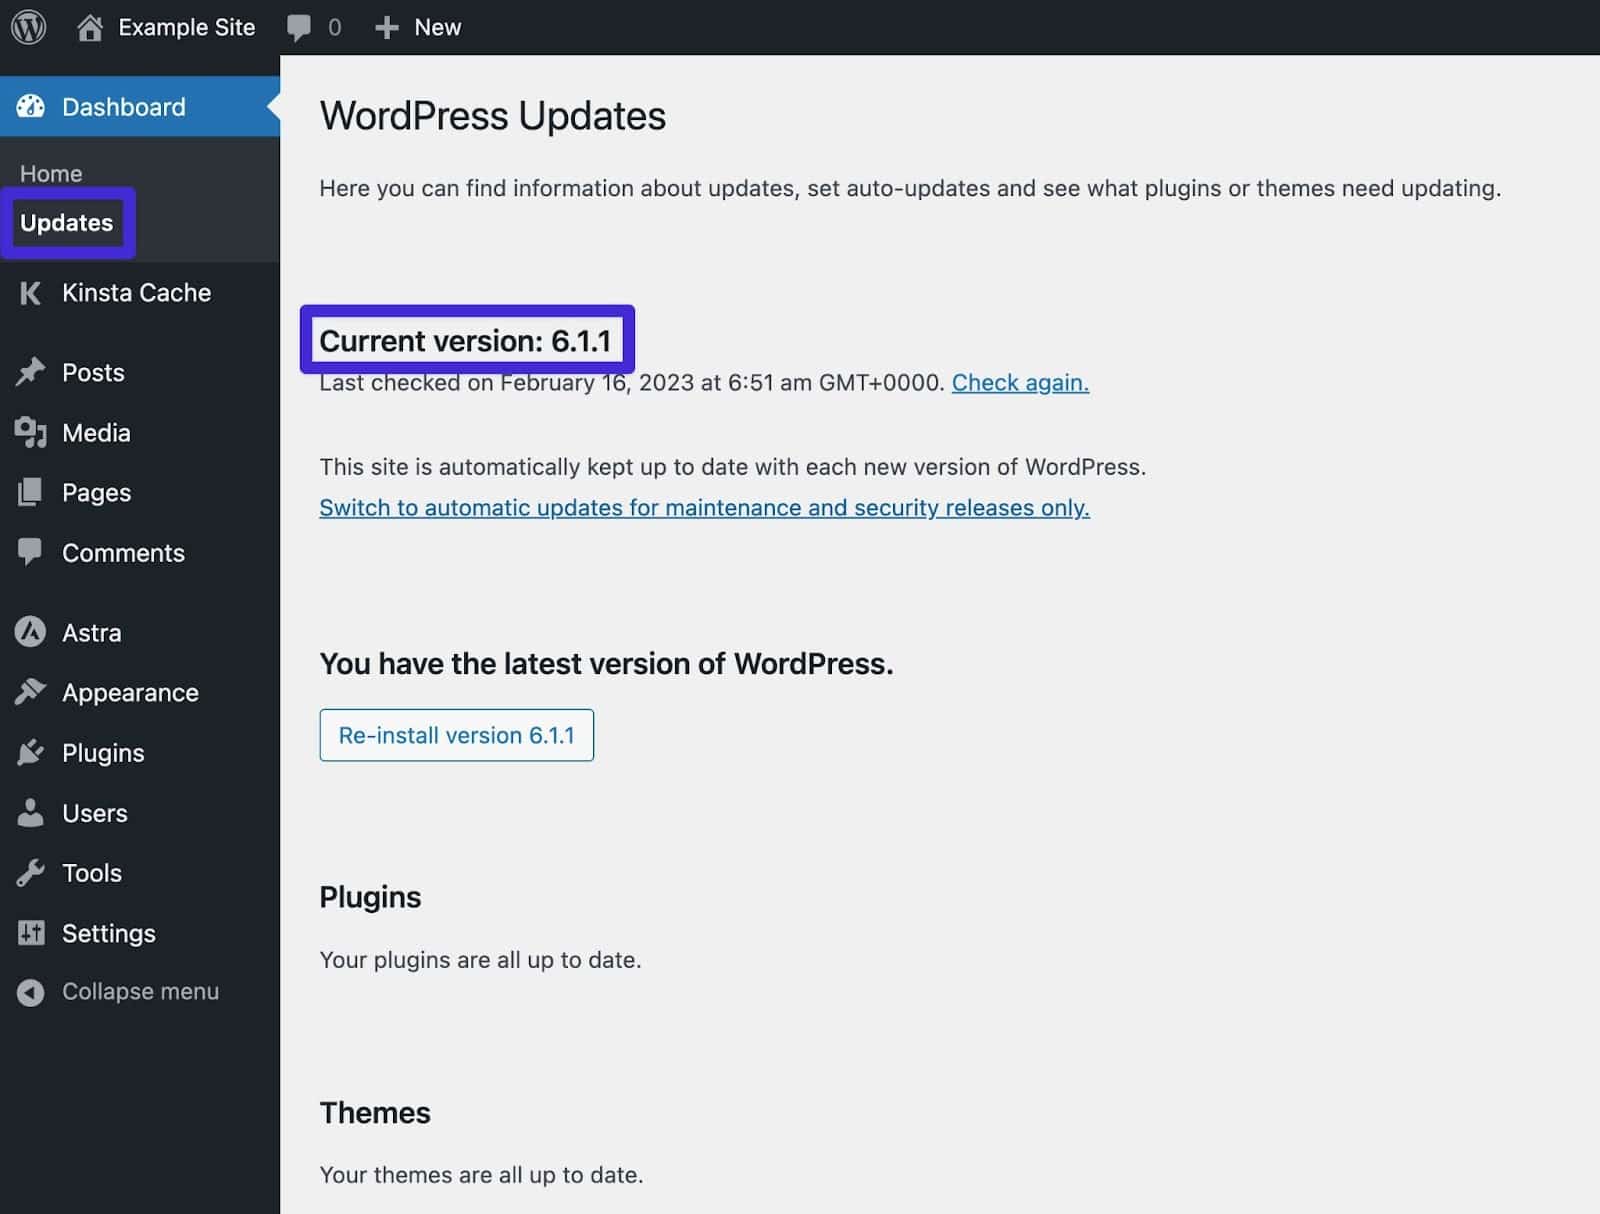 How to check your WordPress version